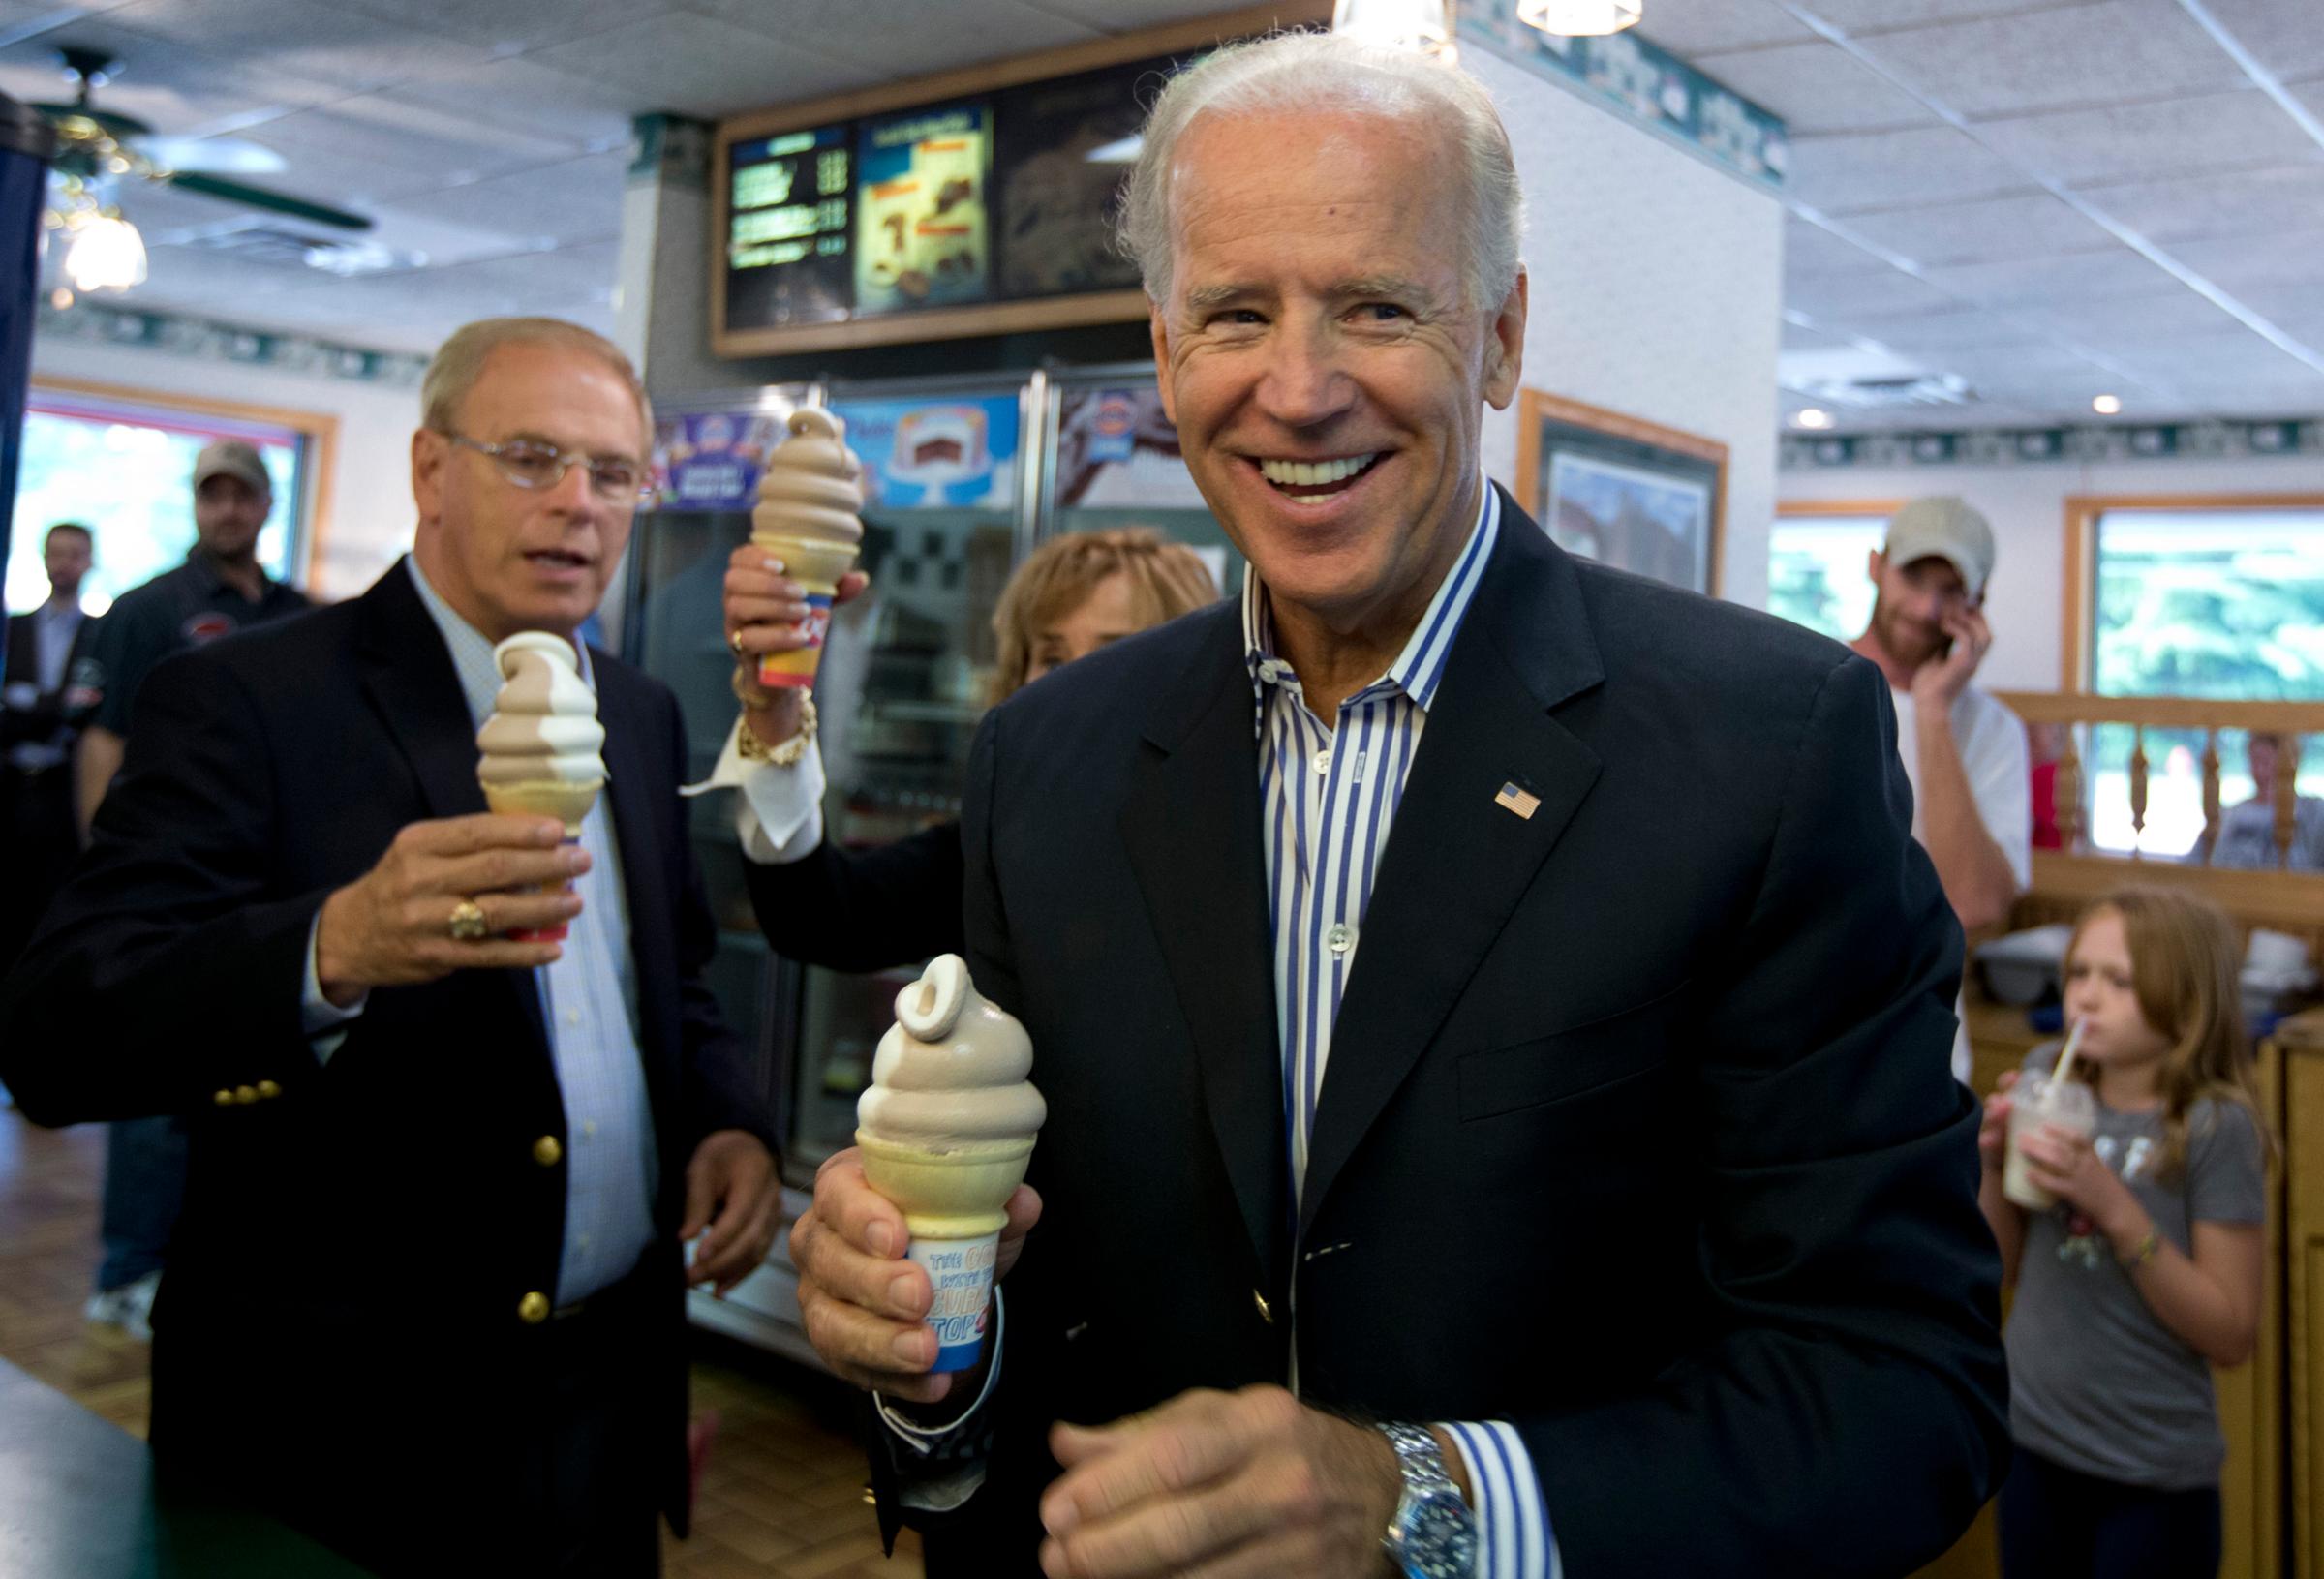 Vice President Joe Biden stops for an ice cream cone at a Dairy Queen with former Ohio Gov. Ted Strickland in Nelsonville, Ohio on Sept. 8, 2012.